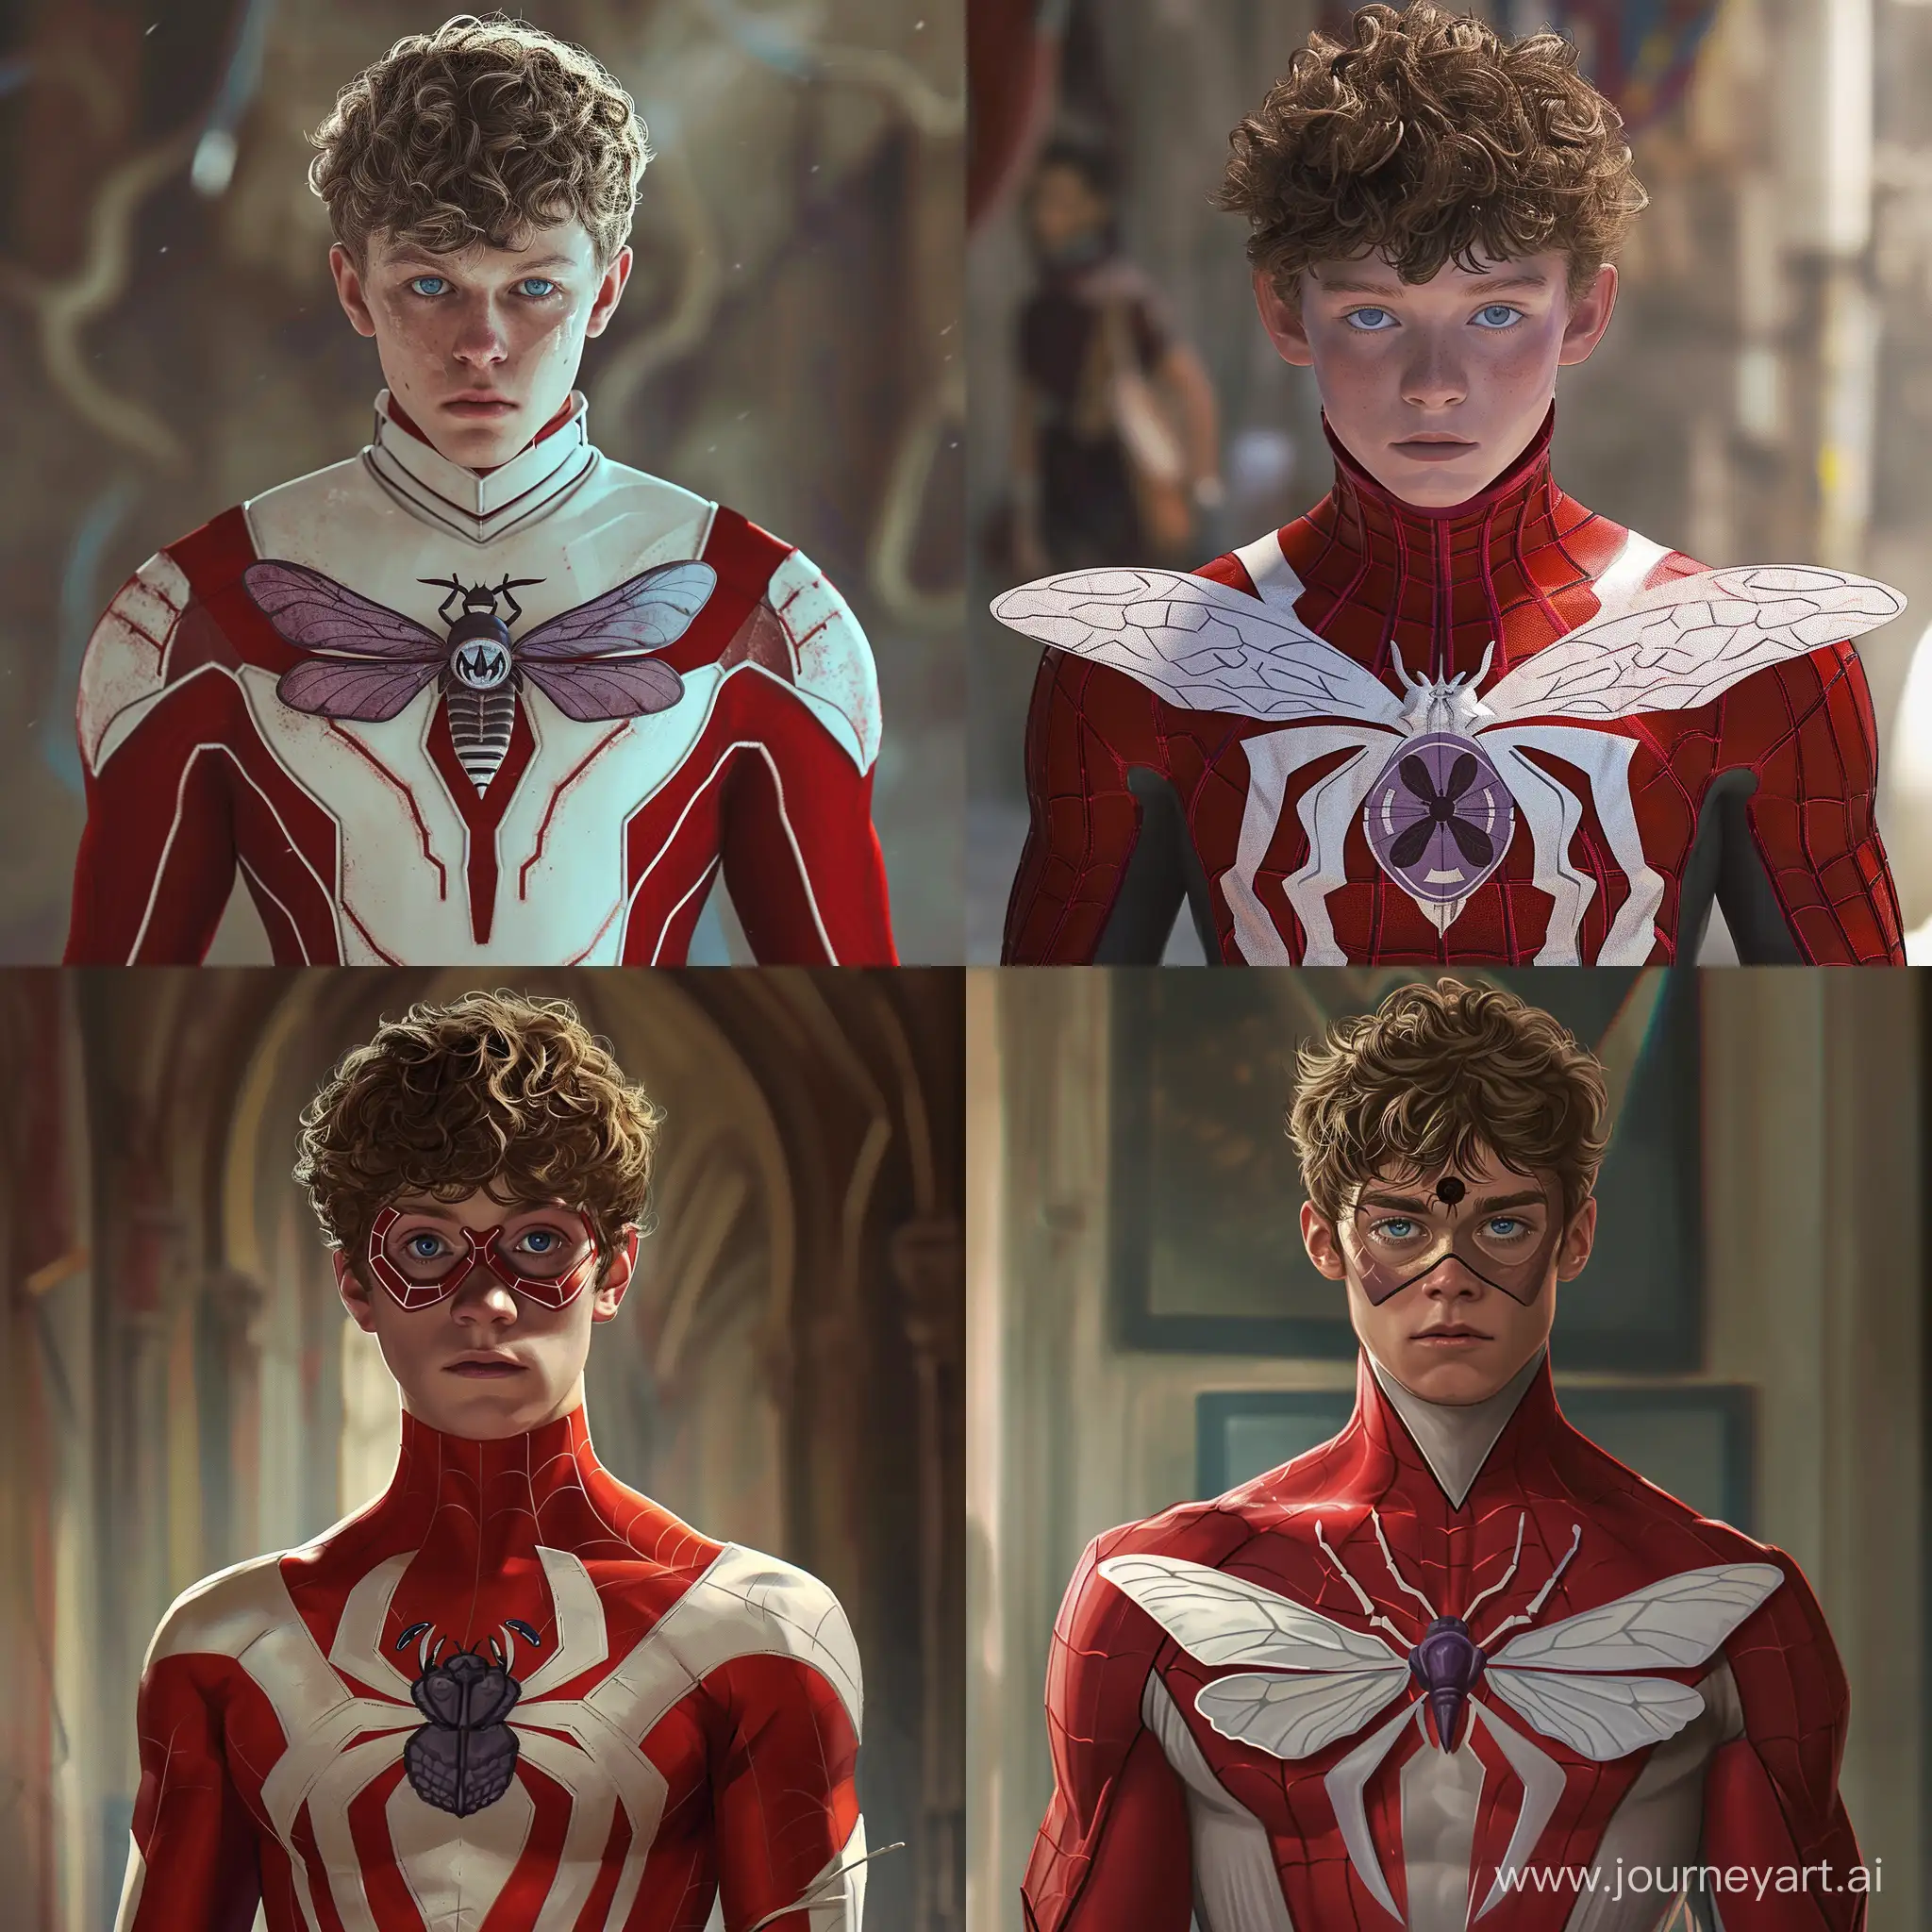 Create a realistic and cinematic illustration of Moth-Man, an 18-year-old superhero inspired by Spider-Man. The costume should feature a combination of shades such as red and white, with subtle dark lavender accents adding a modern touch. Design a slim and sleek costume that emphasizes agility and youthfulness. Incorporate a stylized moth symbol prominently displayed on the chest, representing hope, transformation, and Karter Knight's journey as a hero. Ensure that the image looks like it came straight out of real life or a movie, avoiding a cartoonish or drawn appearance. If the illustration shows Moth-Man without the mask, depict Karter Knight with blue eyes and short to medium length curly (more wavy) dirty blonde hair. Capture the essence of Moth-Man's character, showcasing his youthful energy and the symbolic elements embedded in the costume. Present the image in a visually striking and cinematic manner, highlighting the hero's unique design and the blend of classic and modern superhero aesthetics.